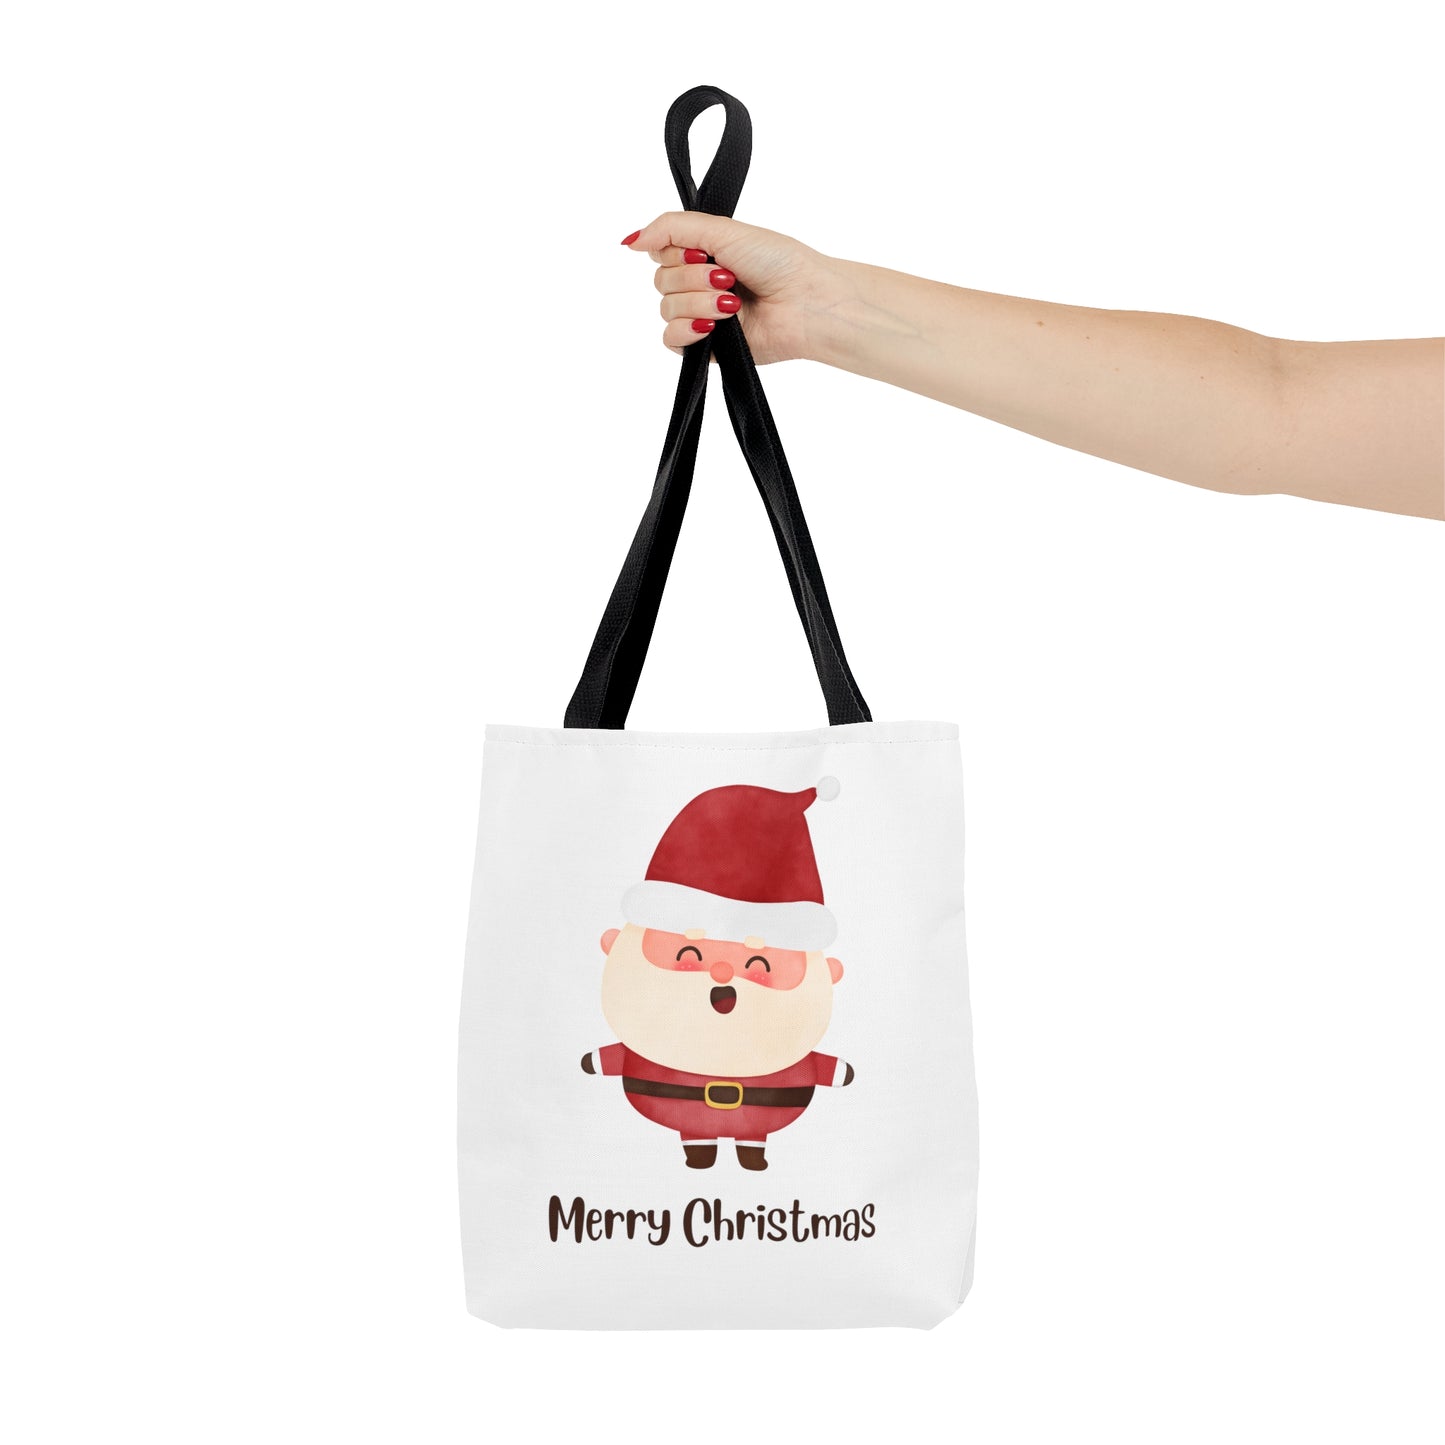 Merry Christmas with Santa Printed Tote Bags